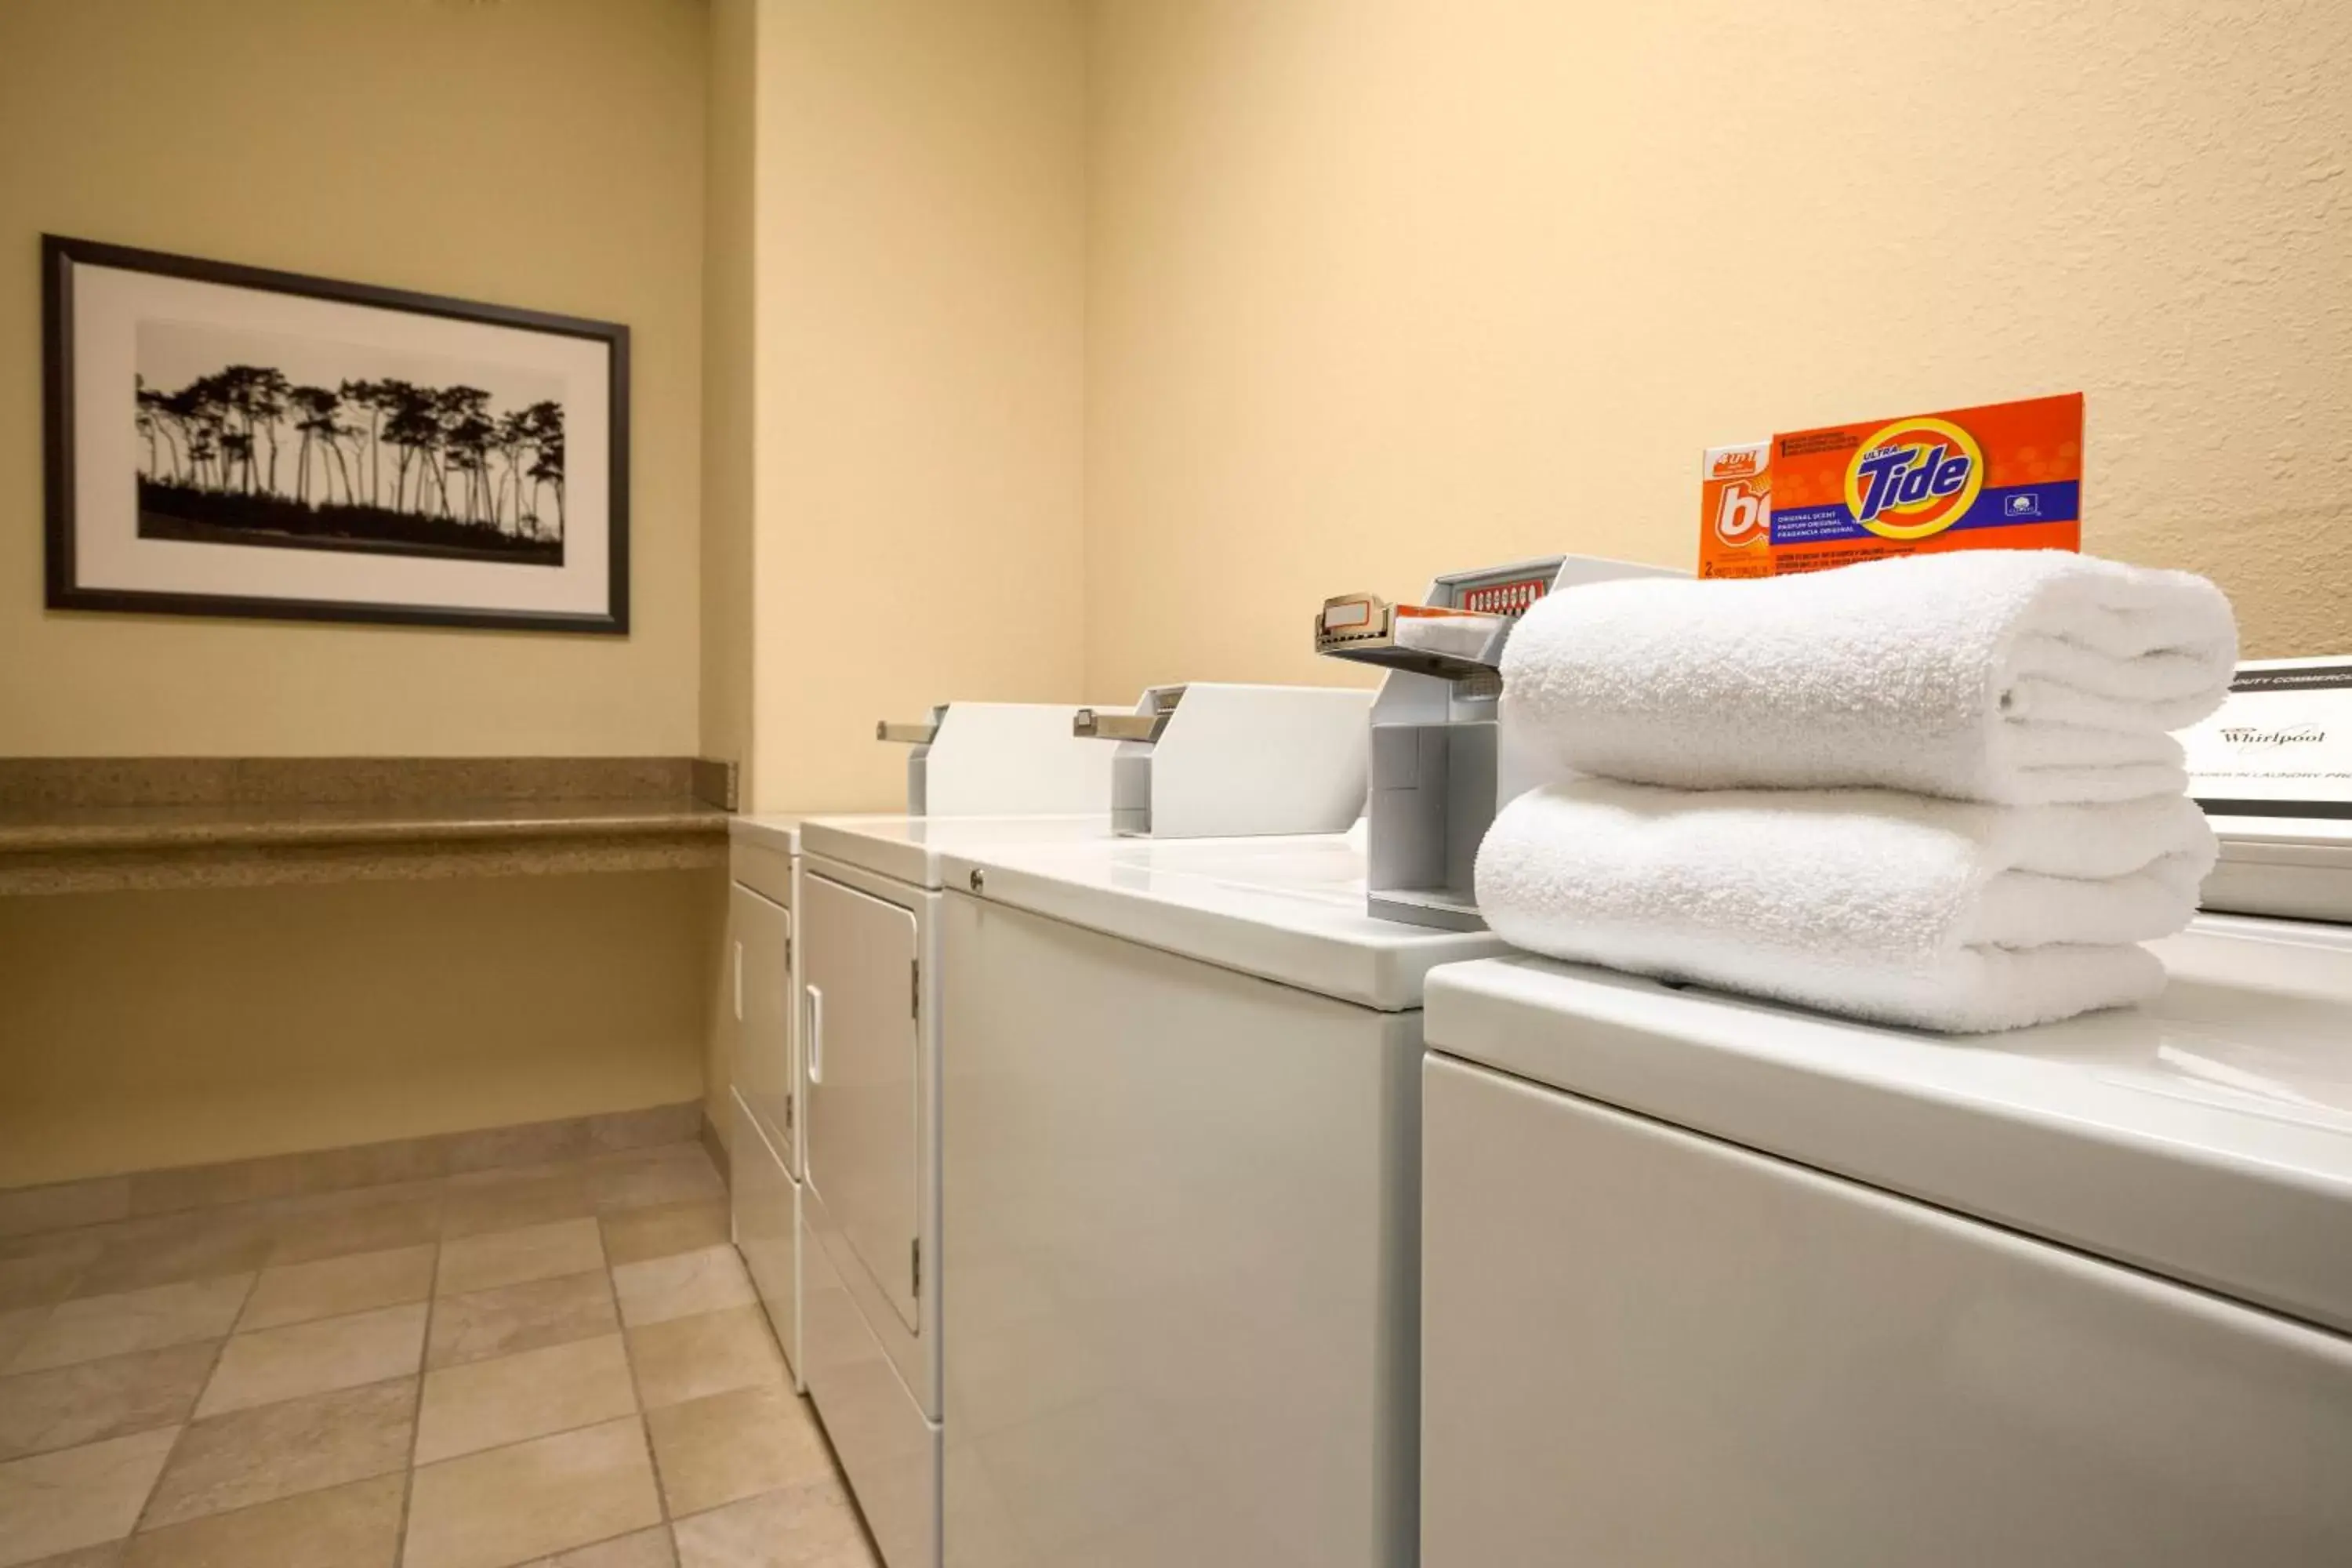 Area and facilities in Country Inn & Suites by Radisson, Brooklyn Center, MN